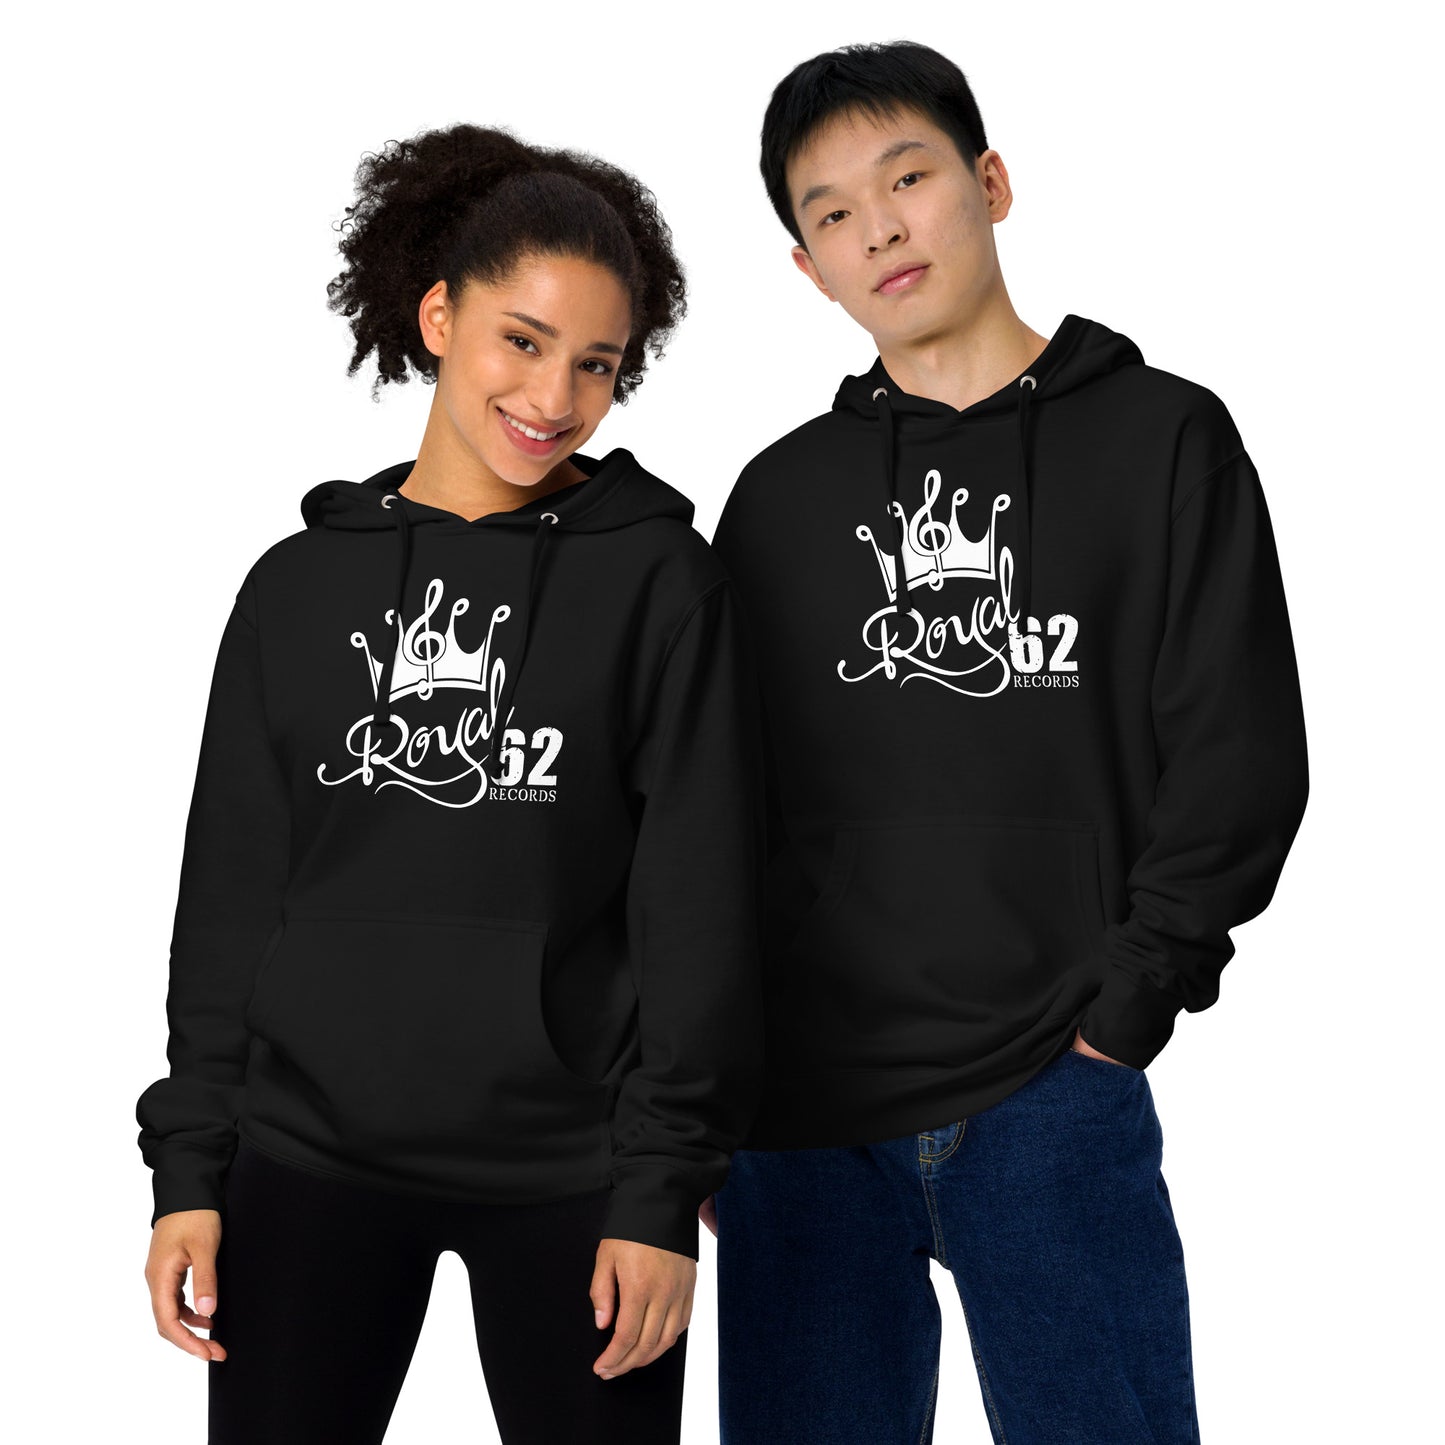 Royal 62 Records Unisex midweight hoodie